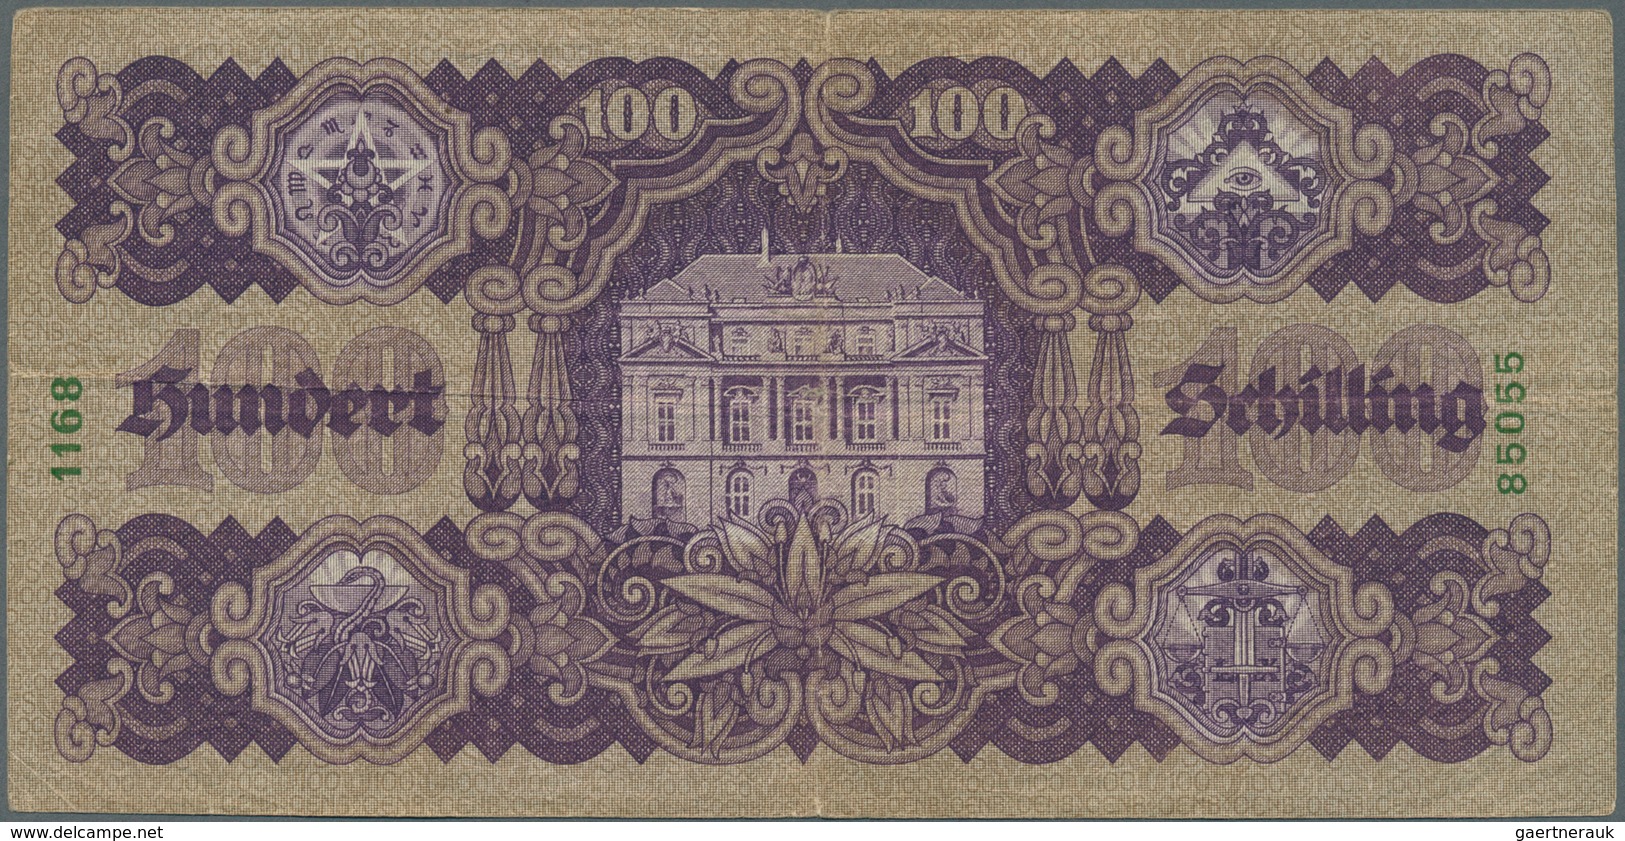 01077 Austria / Österreich: 100 Schilling 1927 P. 97, Used With Folds And Creases, Tiny Center Hole, No Te - Oostenrijk